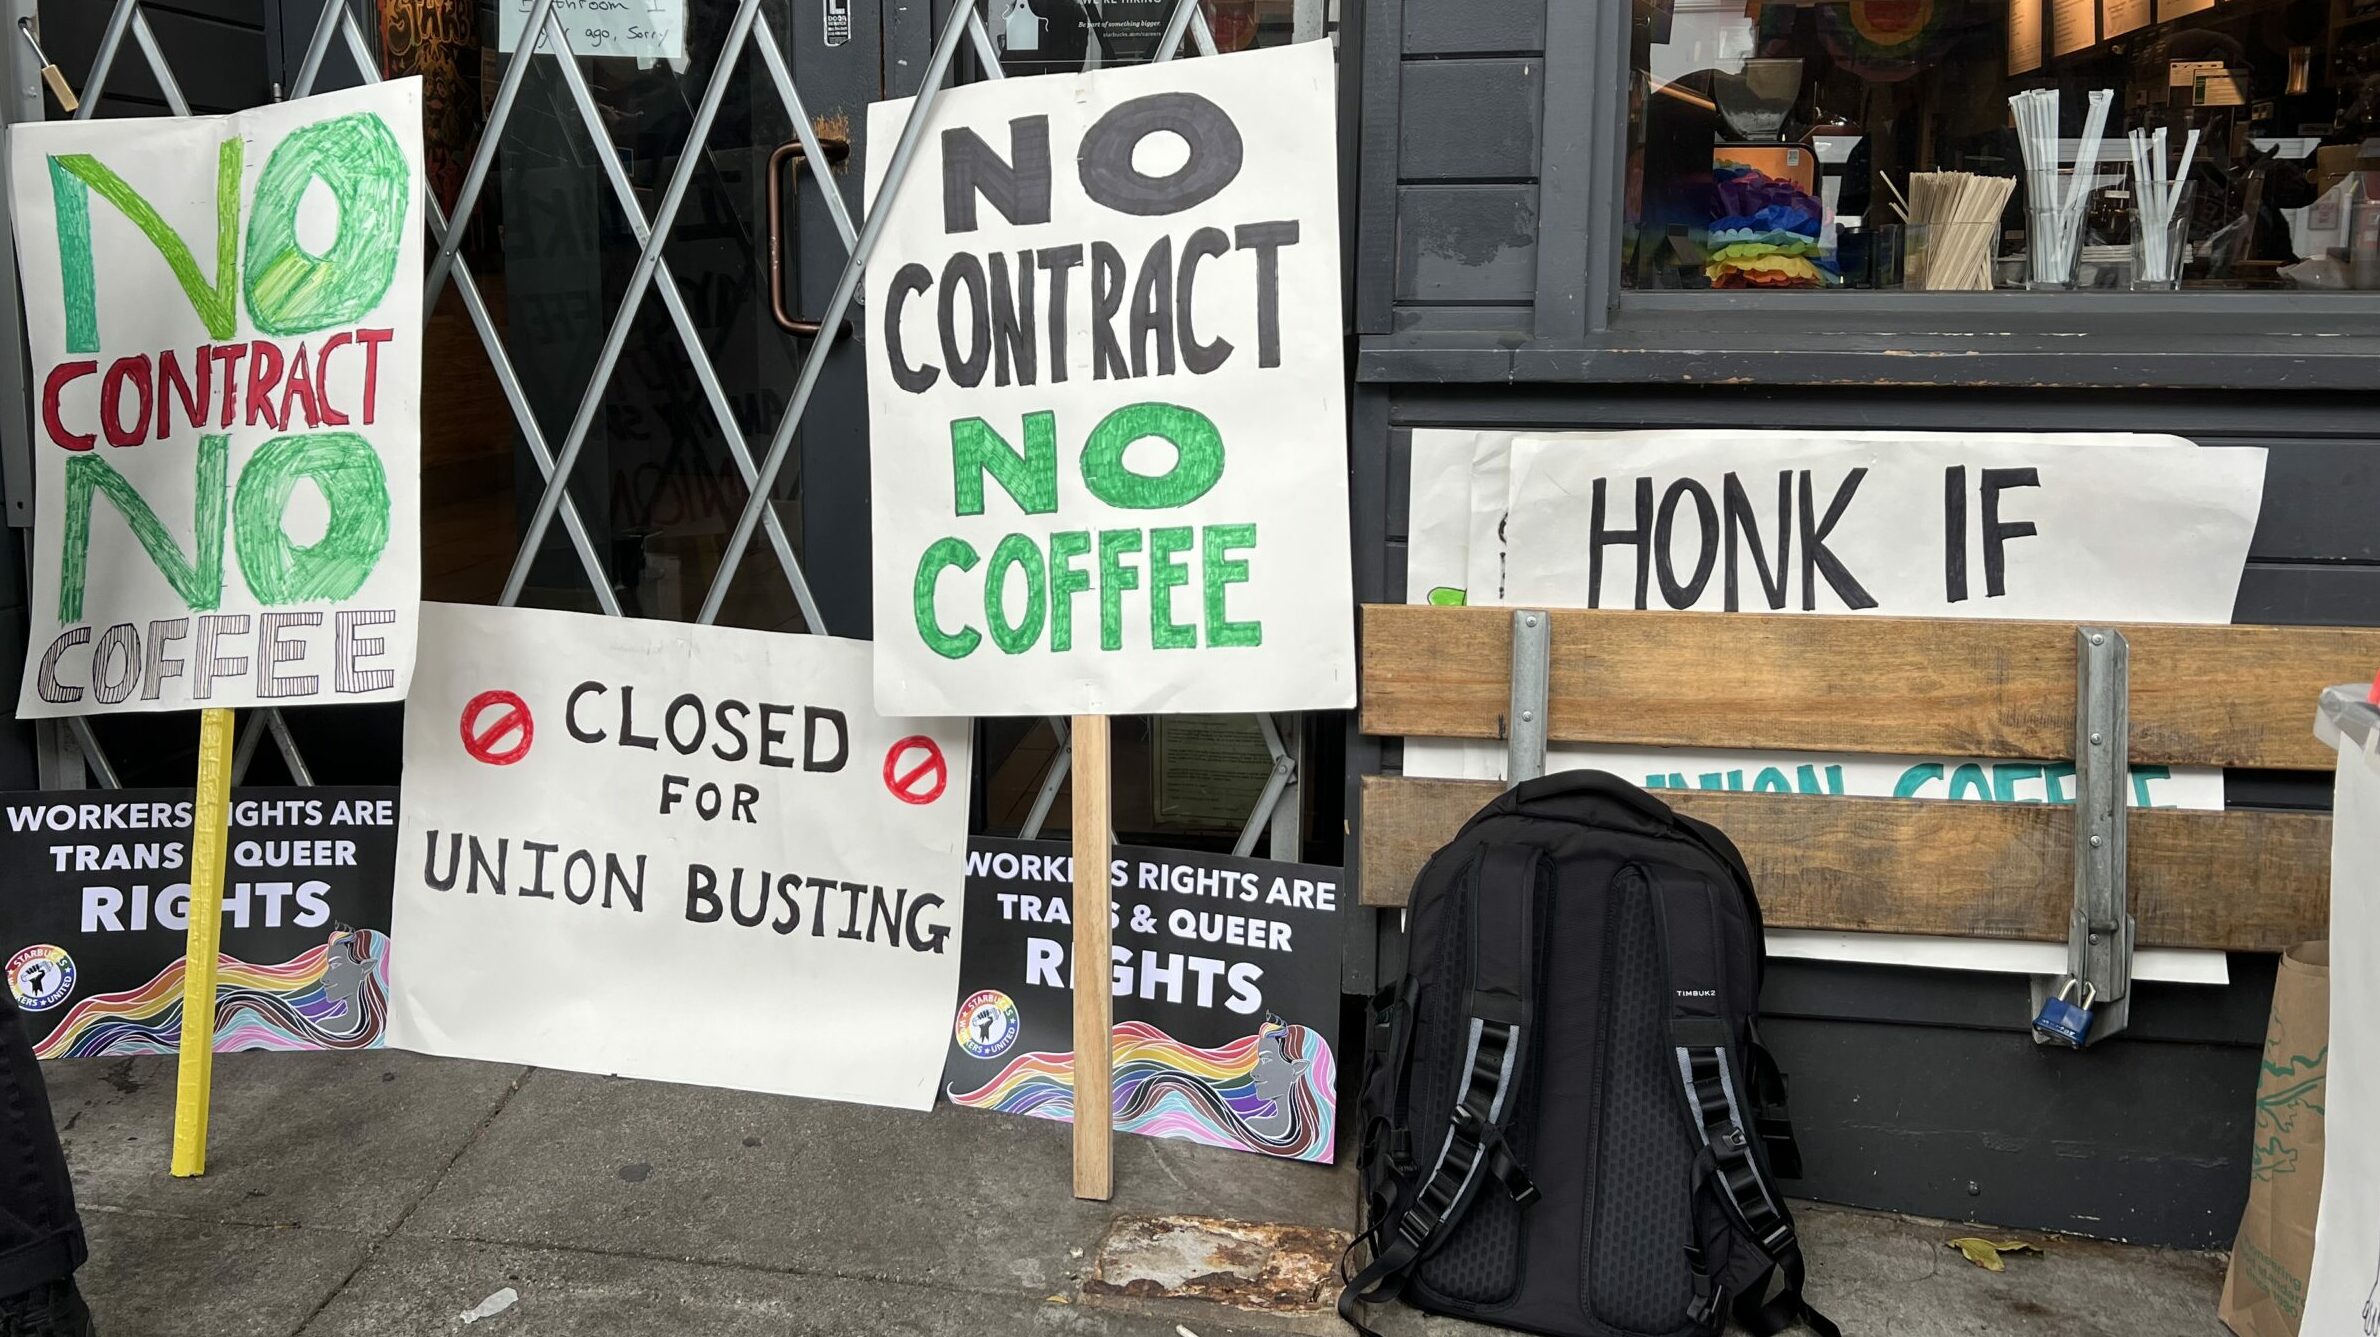 Starbucks workers at San Francisco’s Castro location strike over Pride displays, contract